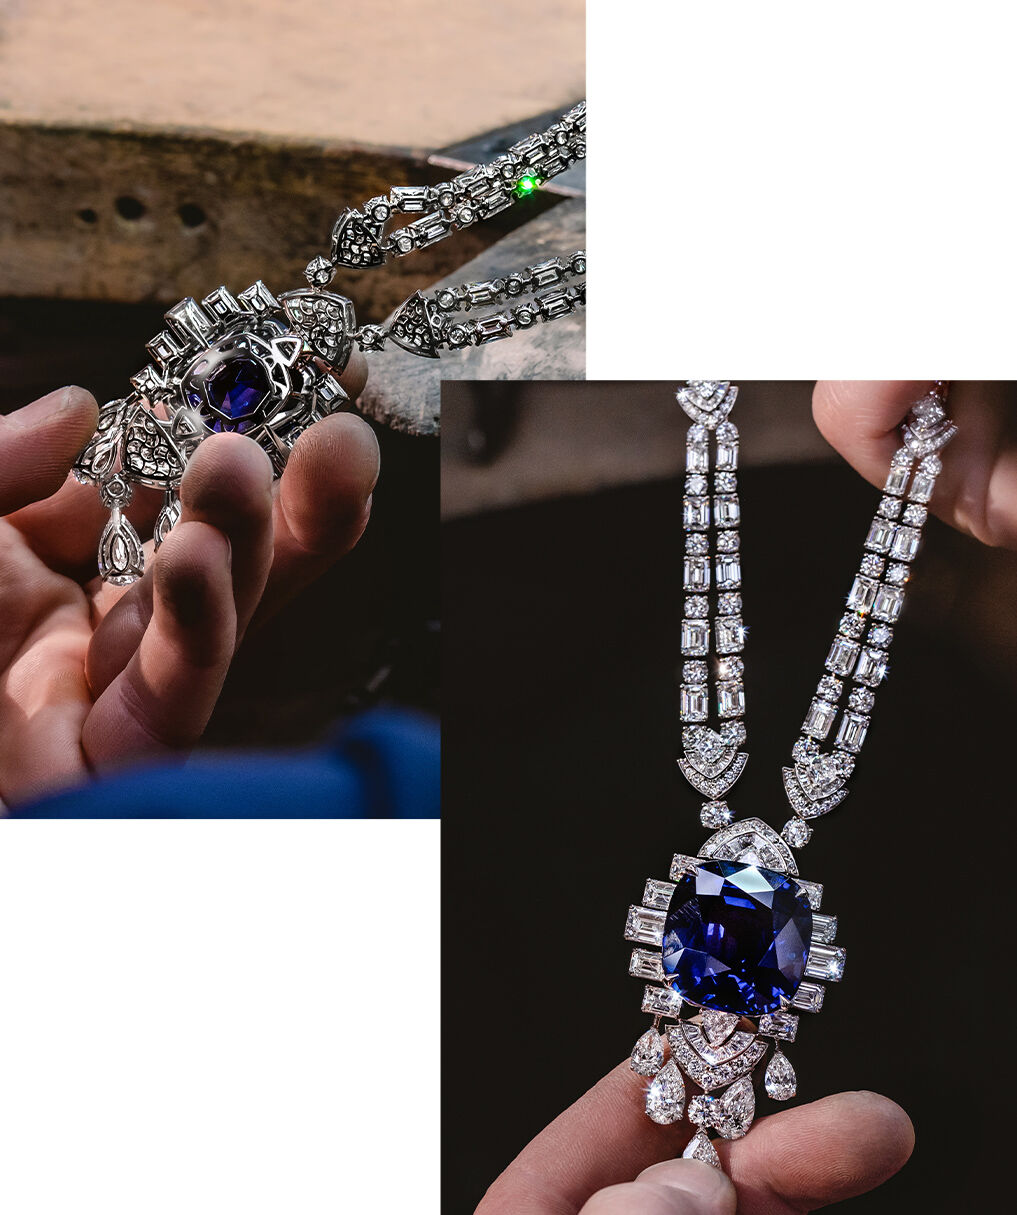 Images of craftsman making of Graff sapphire and white diamond high jewellery